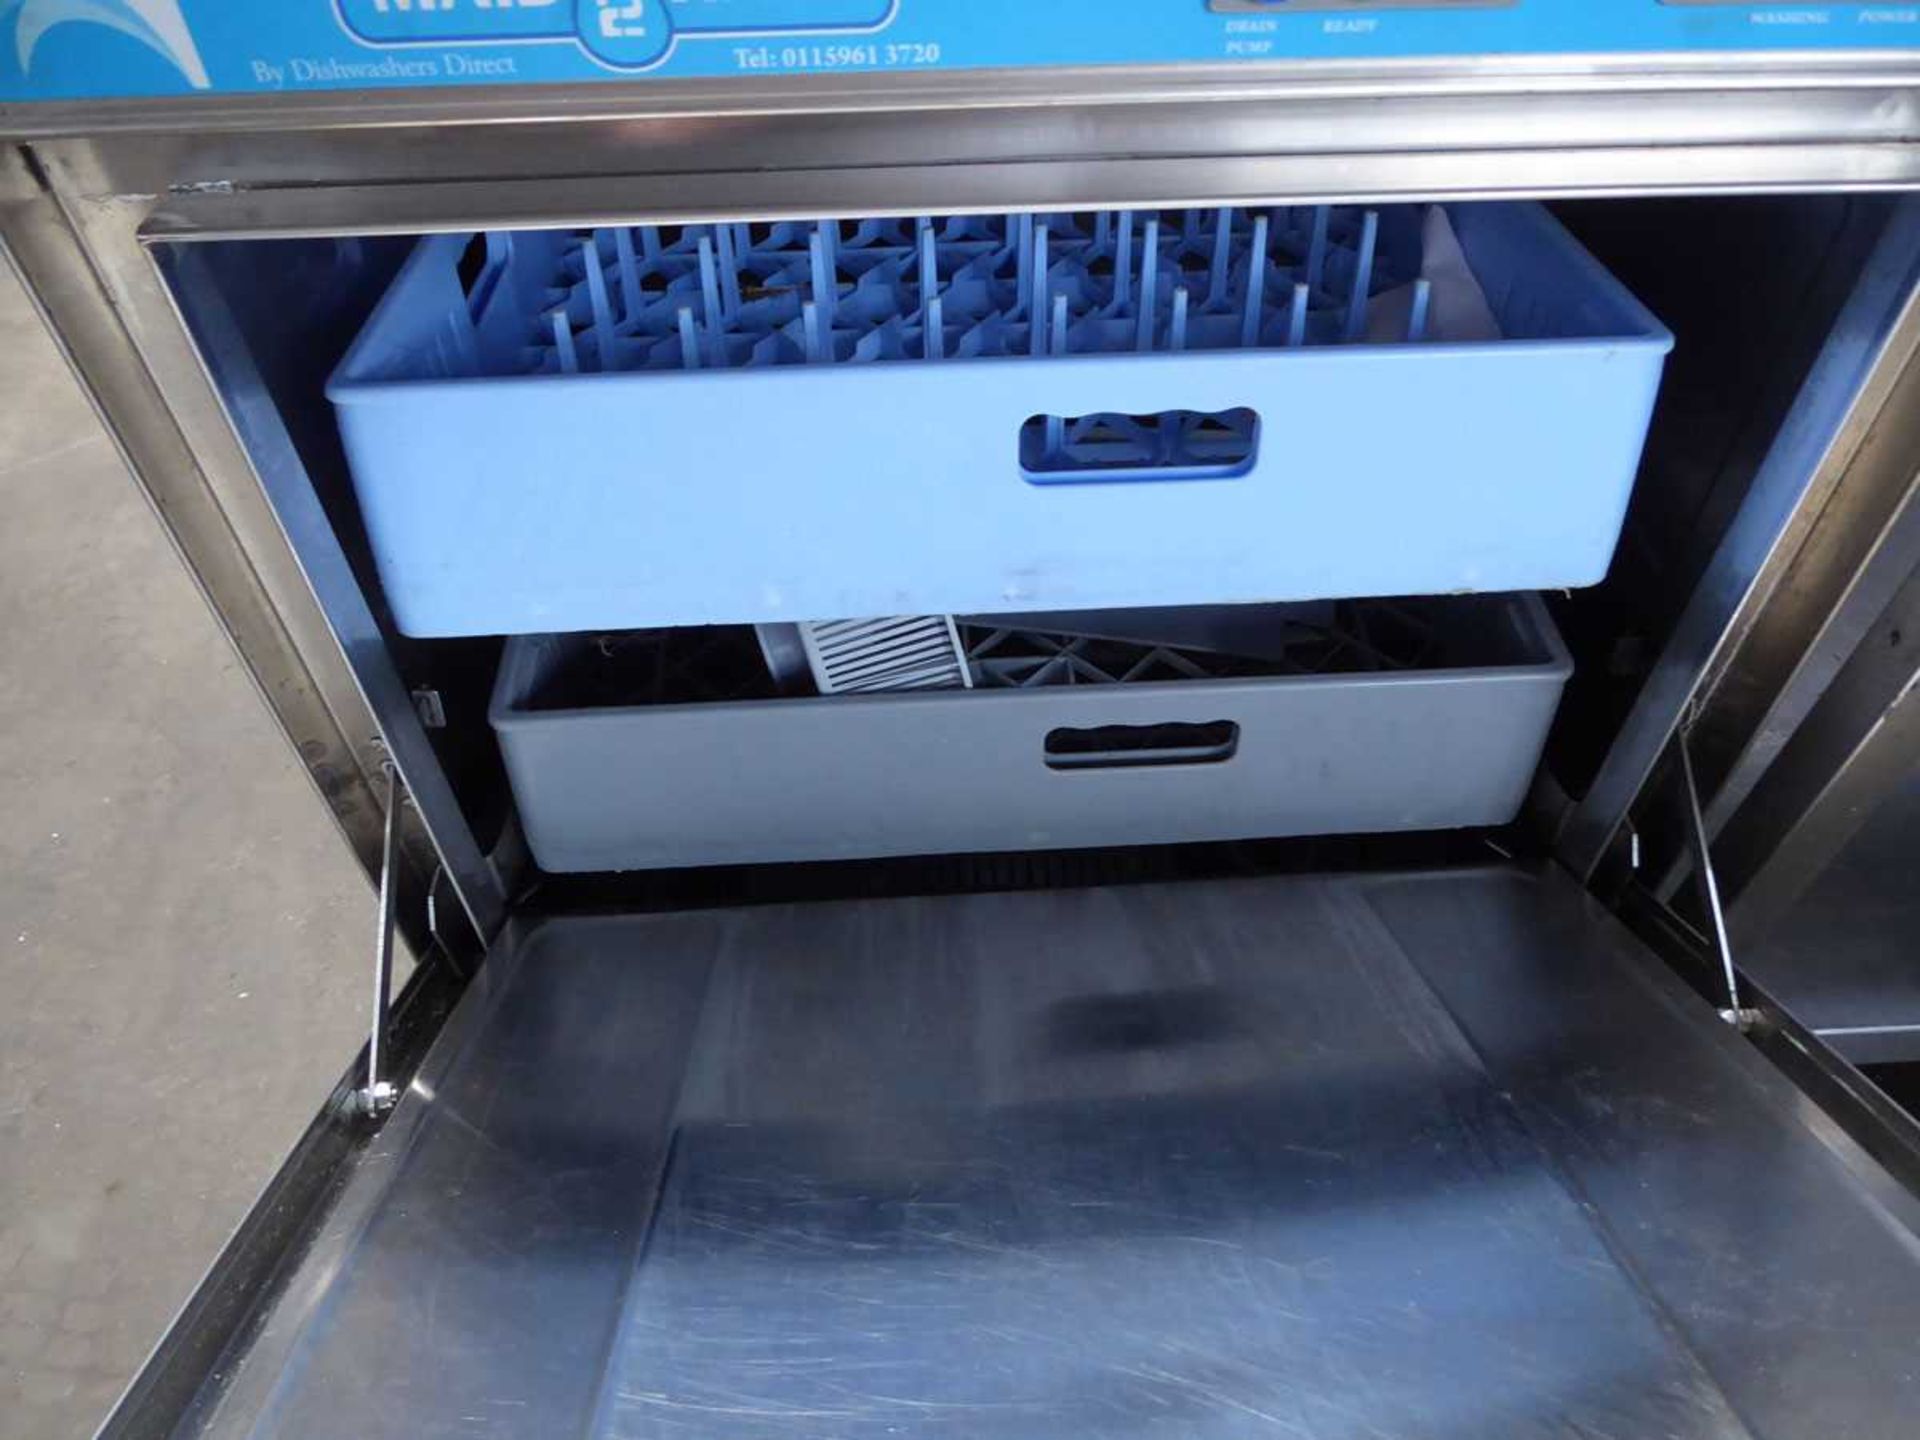 59cm Maid Wash 2 model 50ABSMK2 undercounter washer - Image 2 of 2